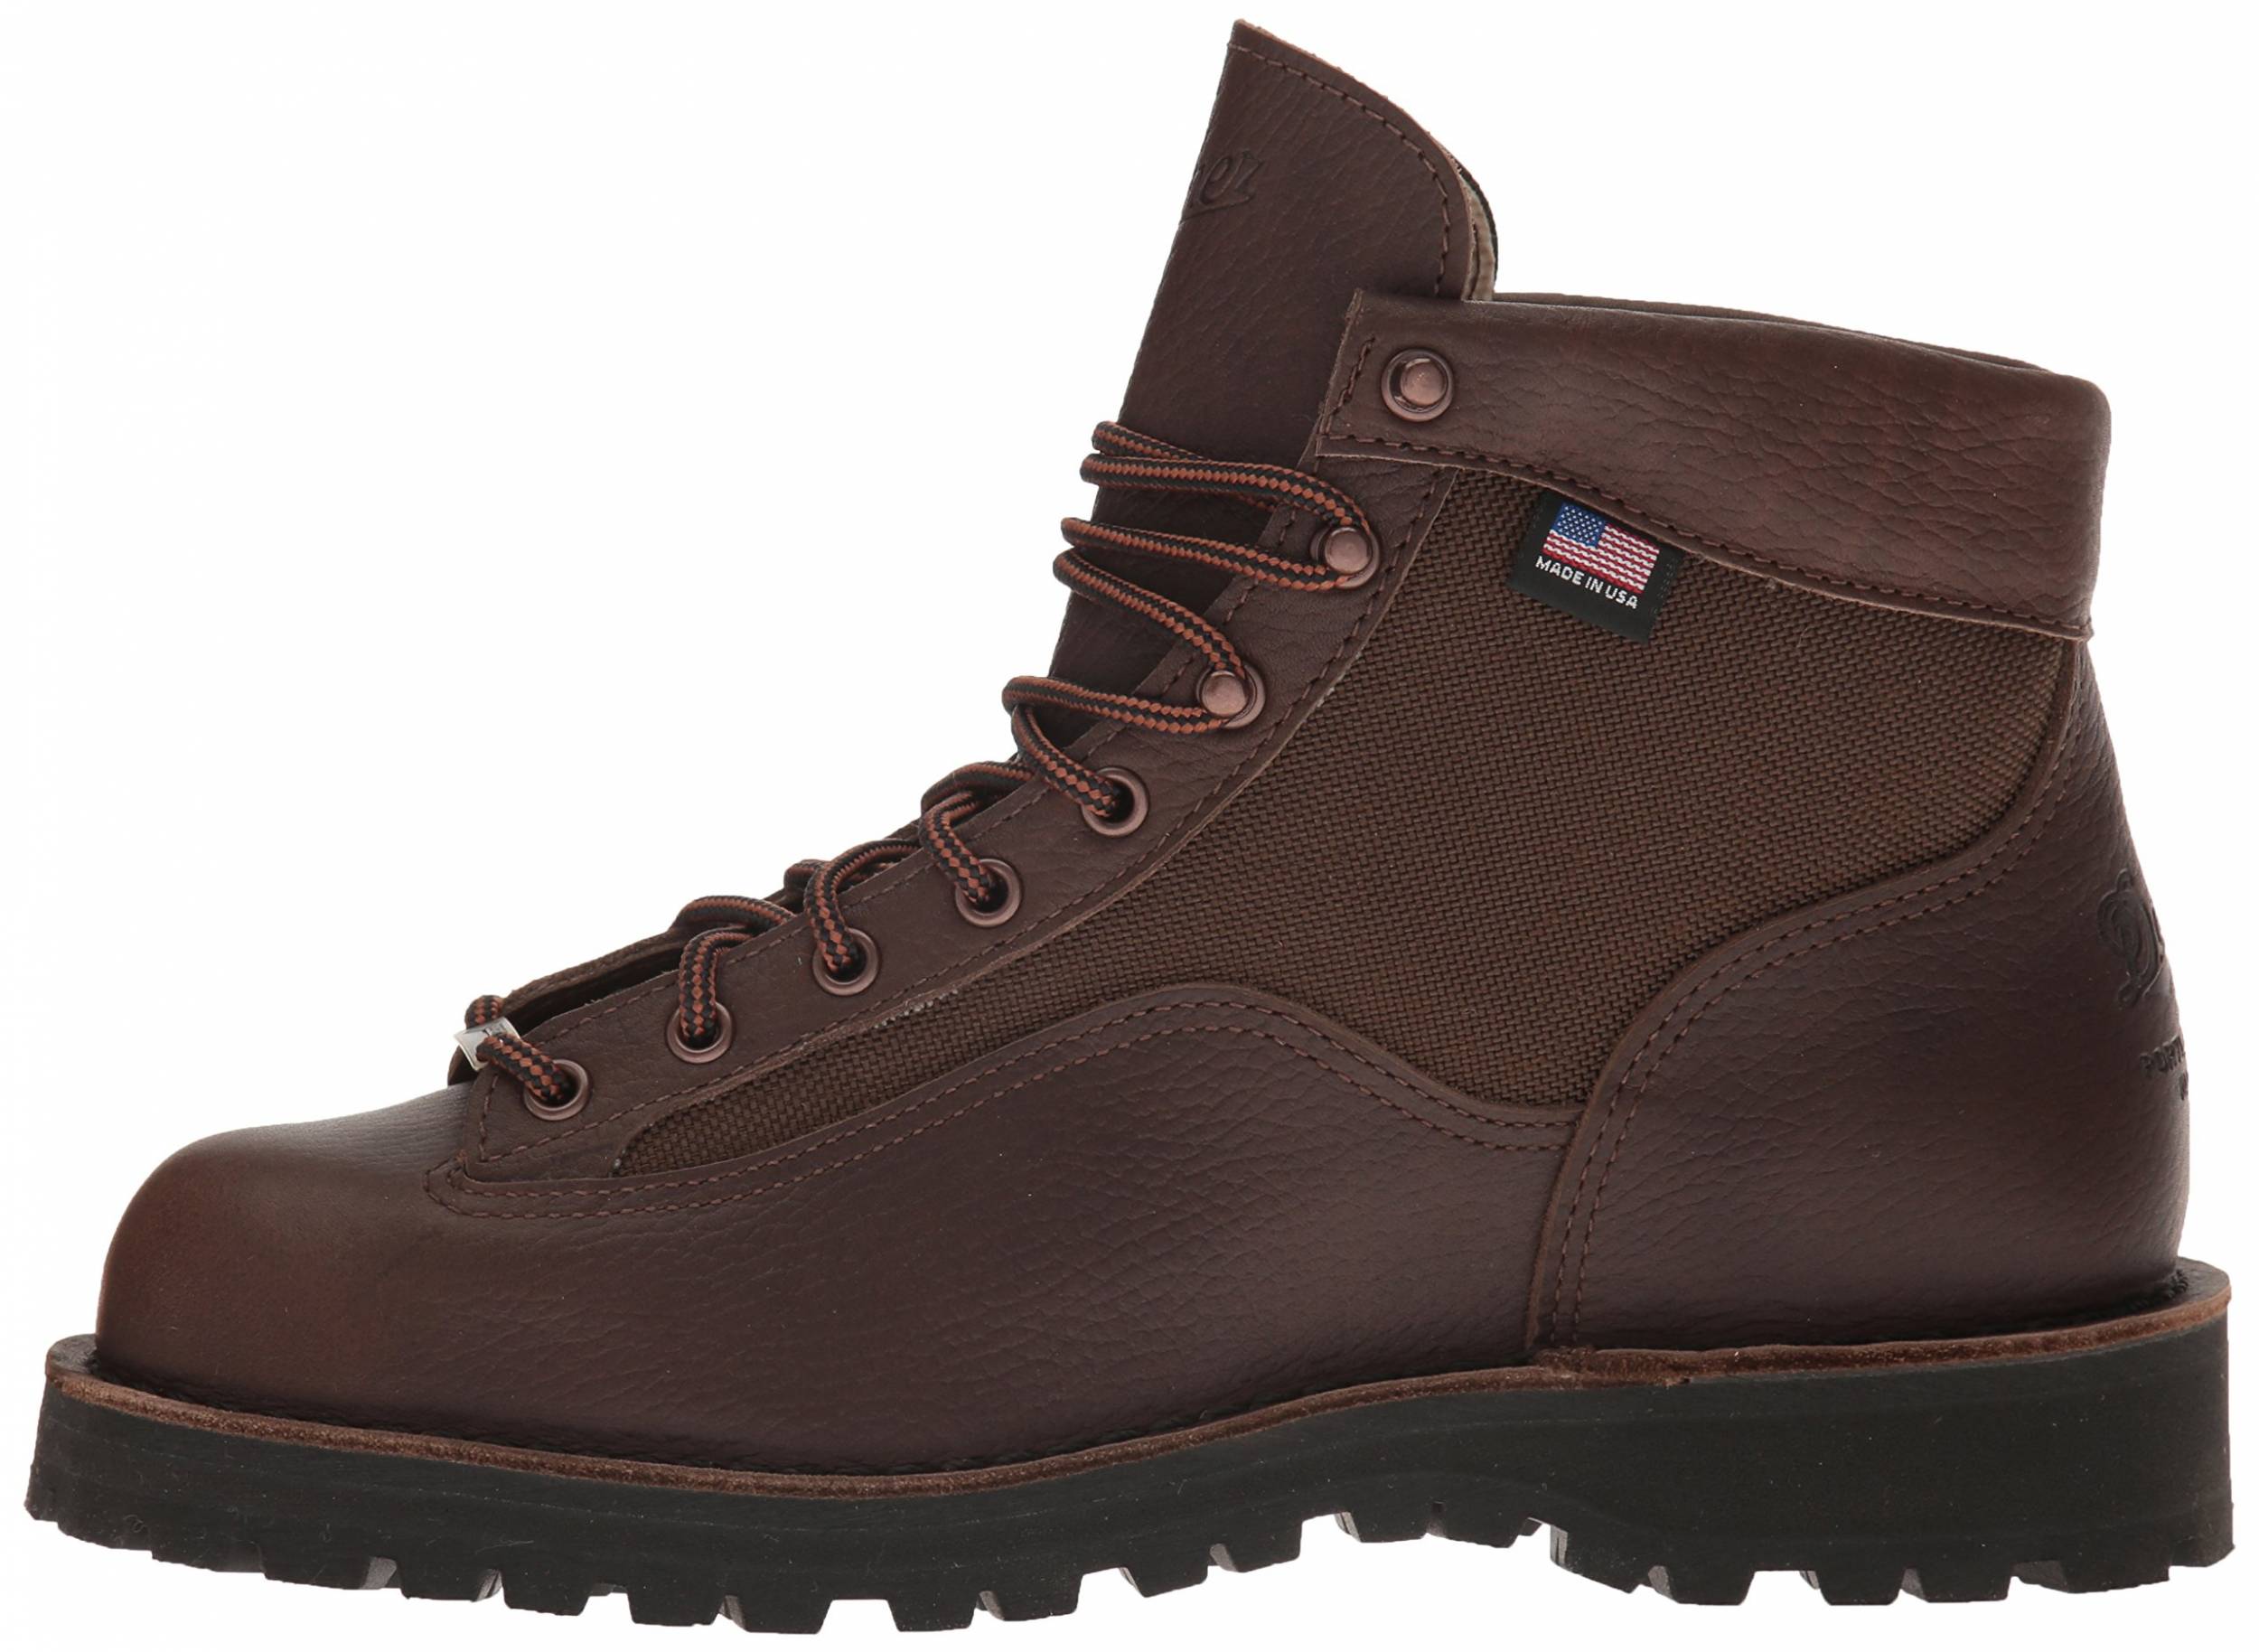 Only $277 + Review of Danner Light II 